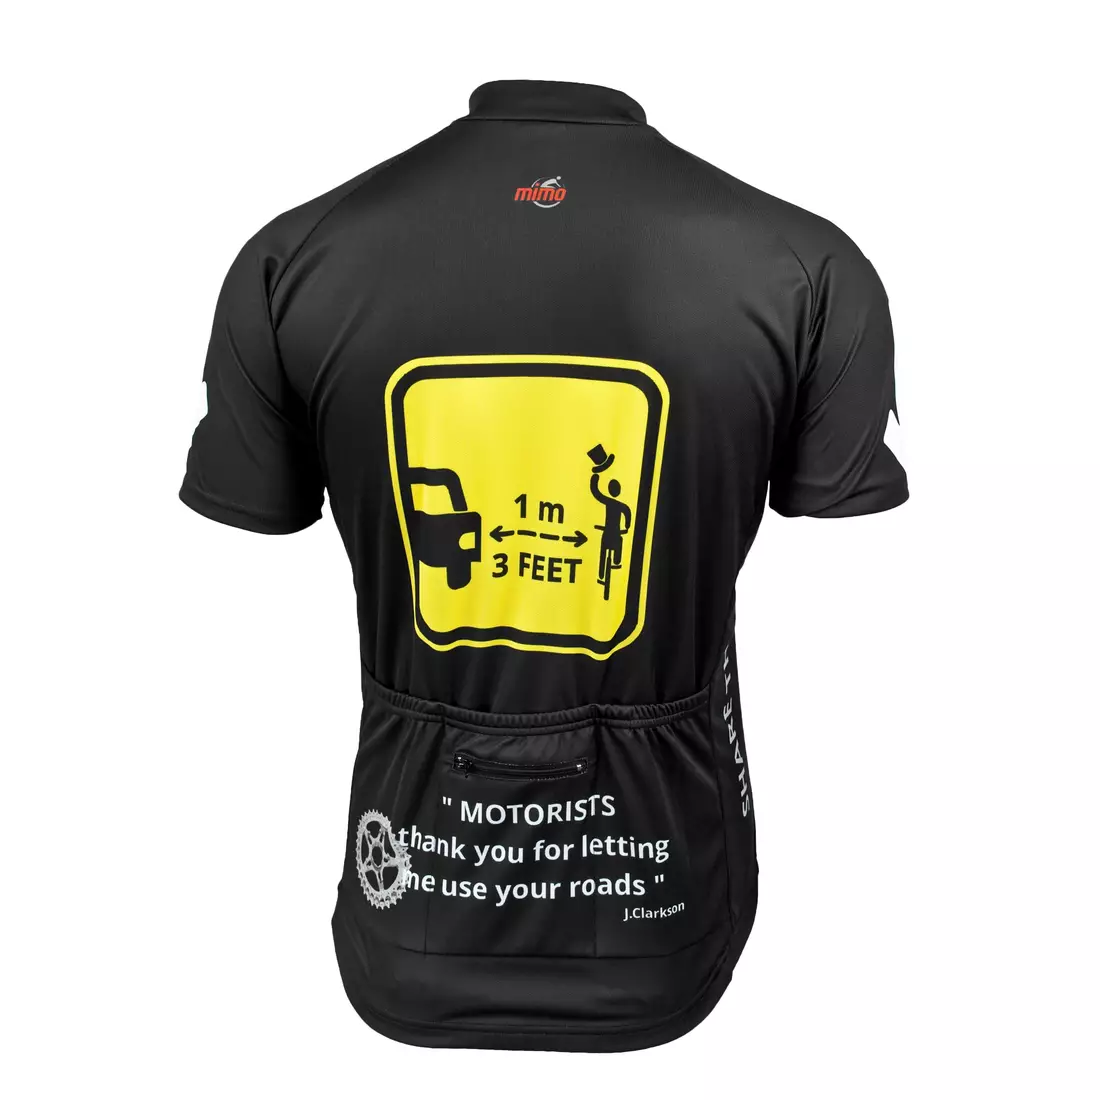 MikeSPORT DESIGN - SHARE THE ROAD - cycling jersey, color: black